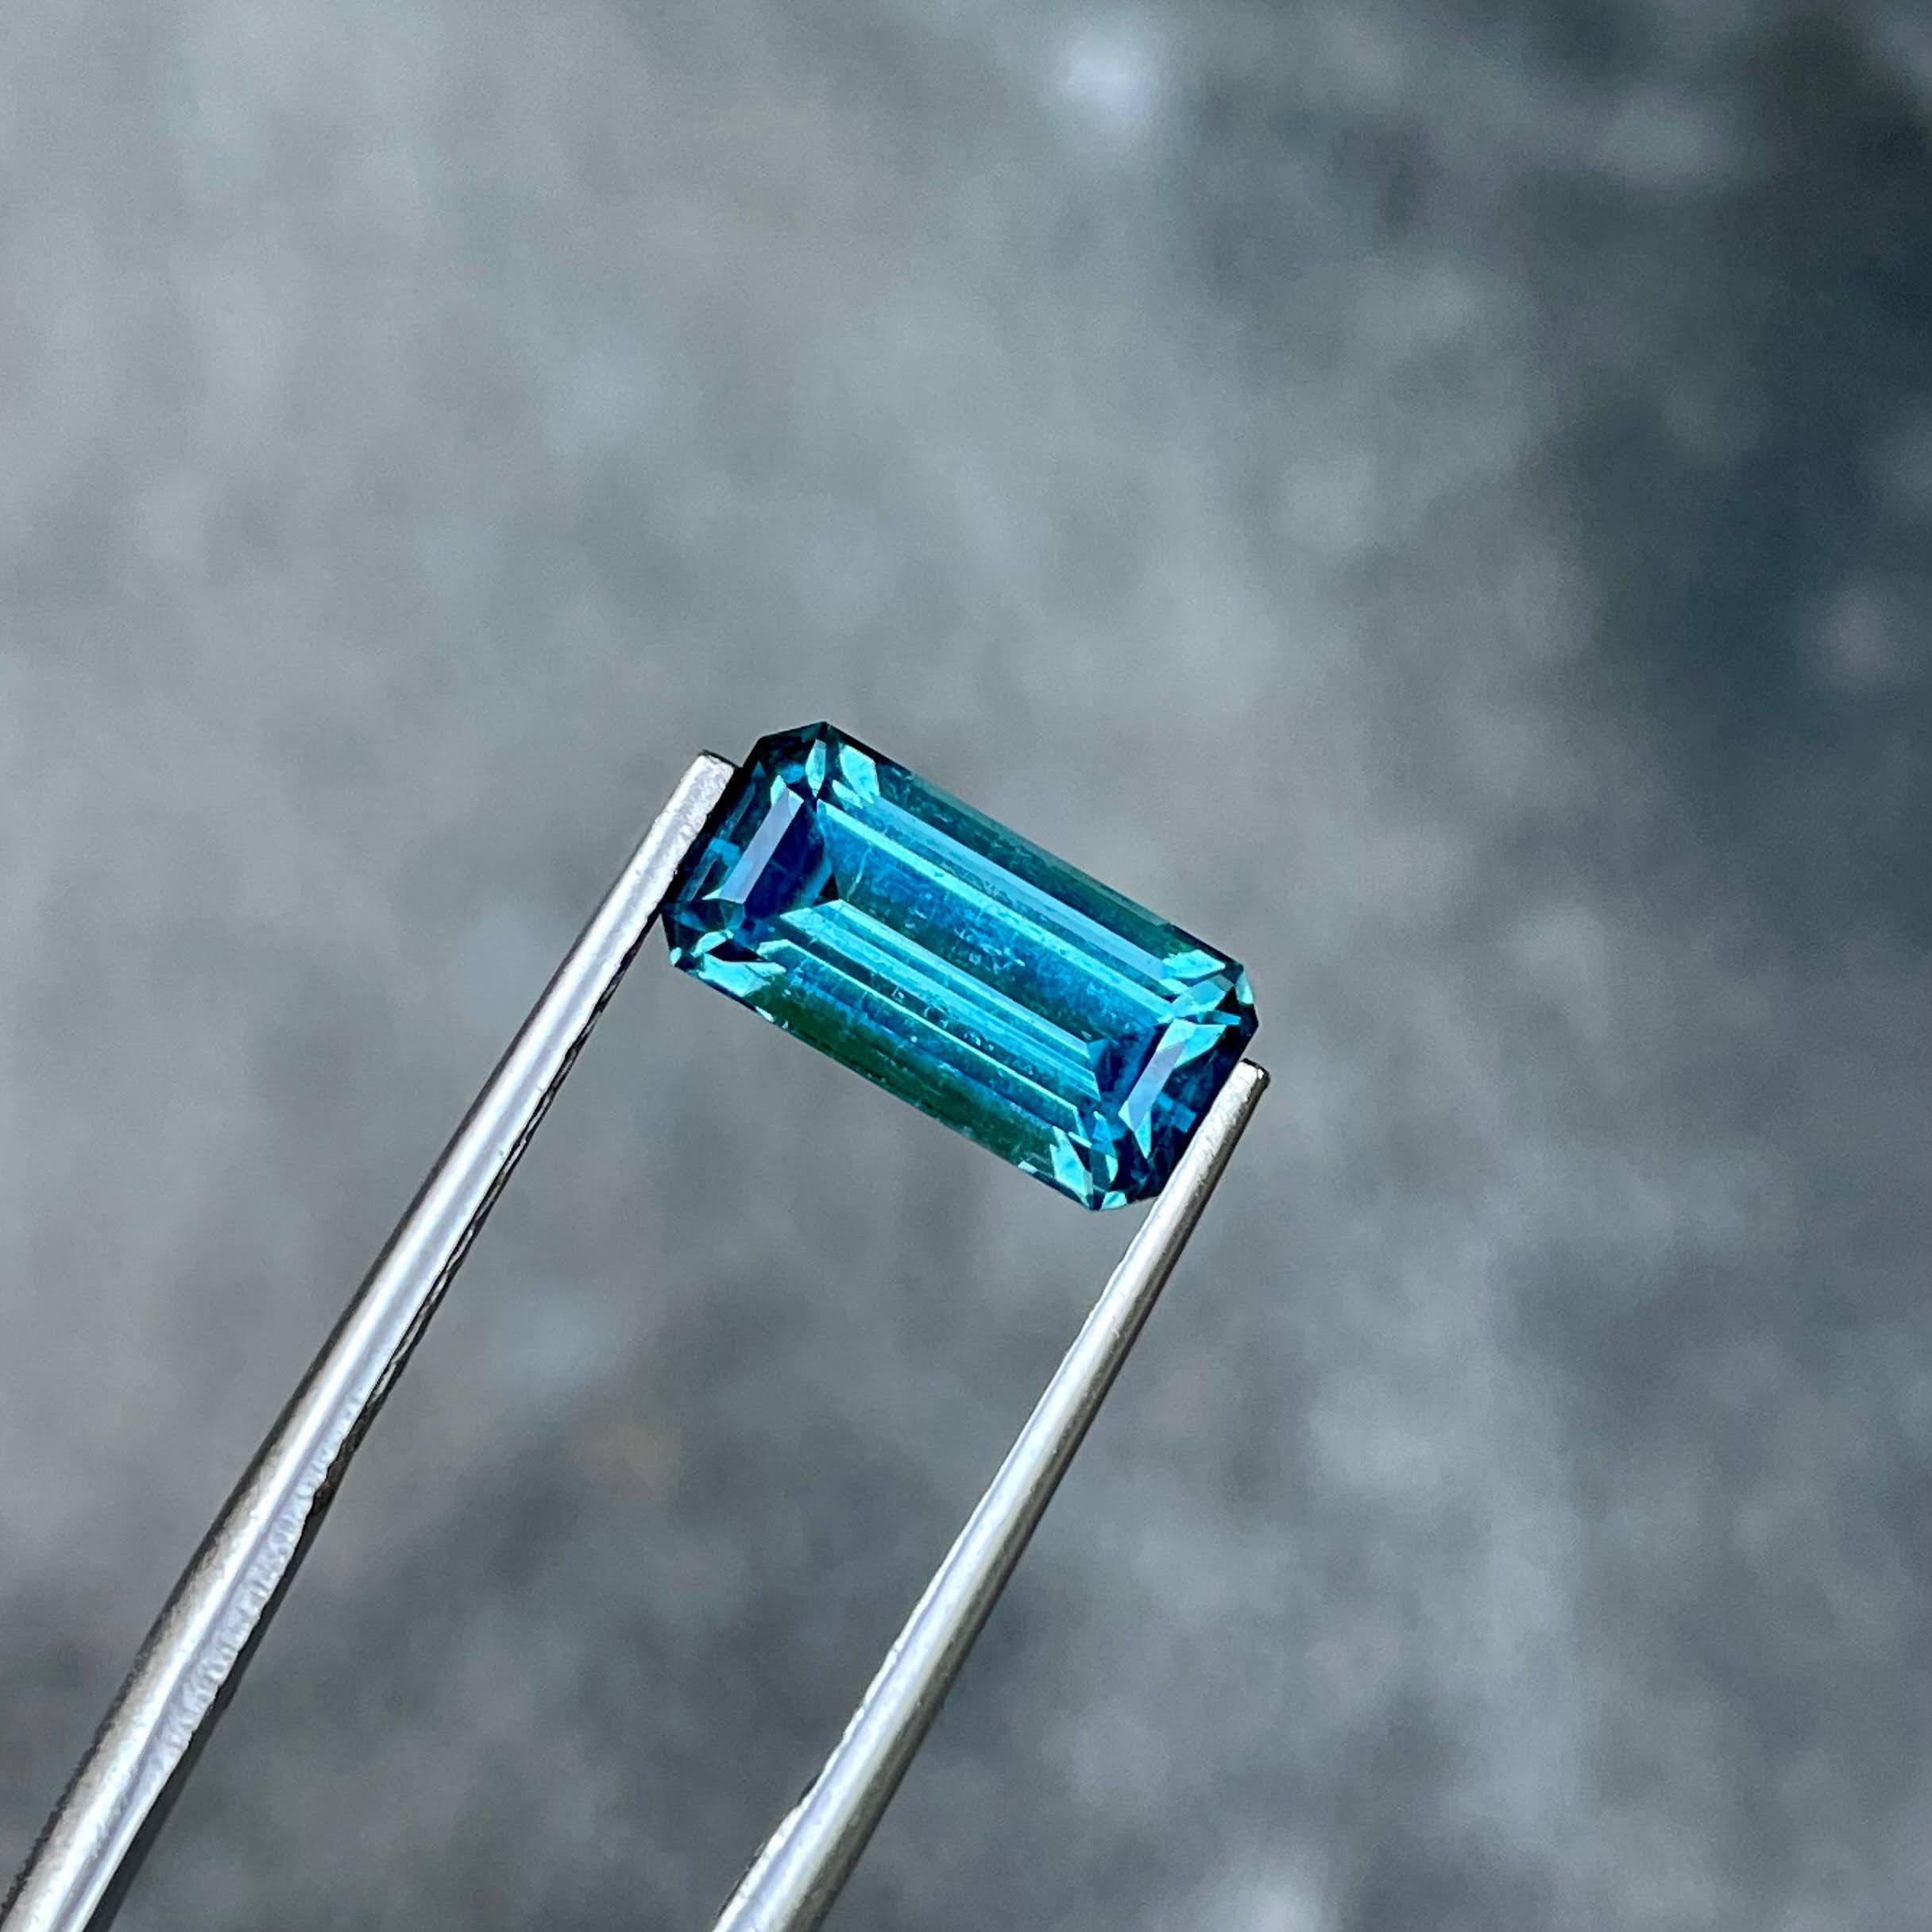 Weight 3.13 carats
Dimensions 11.8x5.9x5.1 mm
Treatment none 
Origin Afghanistan 
Clarity VVS
Shape octagon 
Cut emerald 




The Soft Indicolite tourmaline is a mesmerizing gemstone that captivates with its tranquil hues and remarkable beauty. This